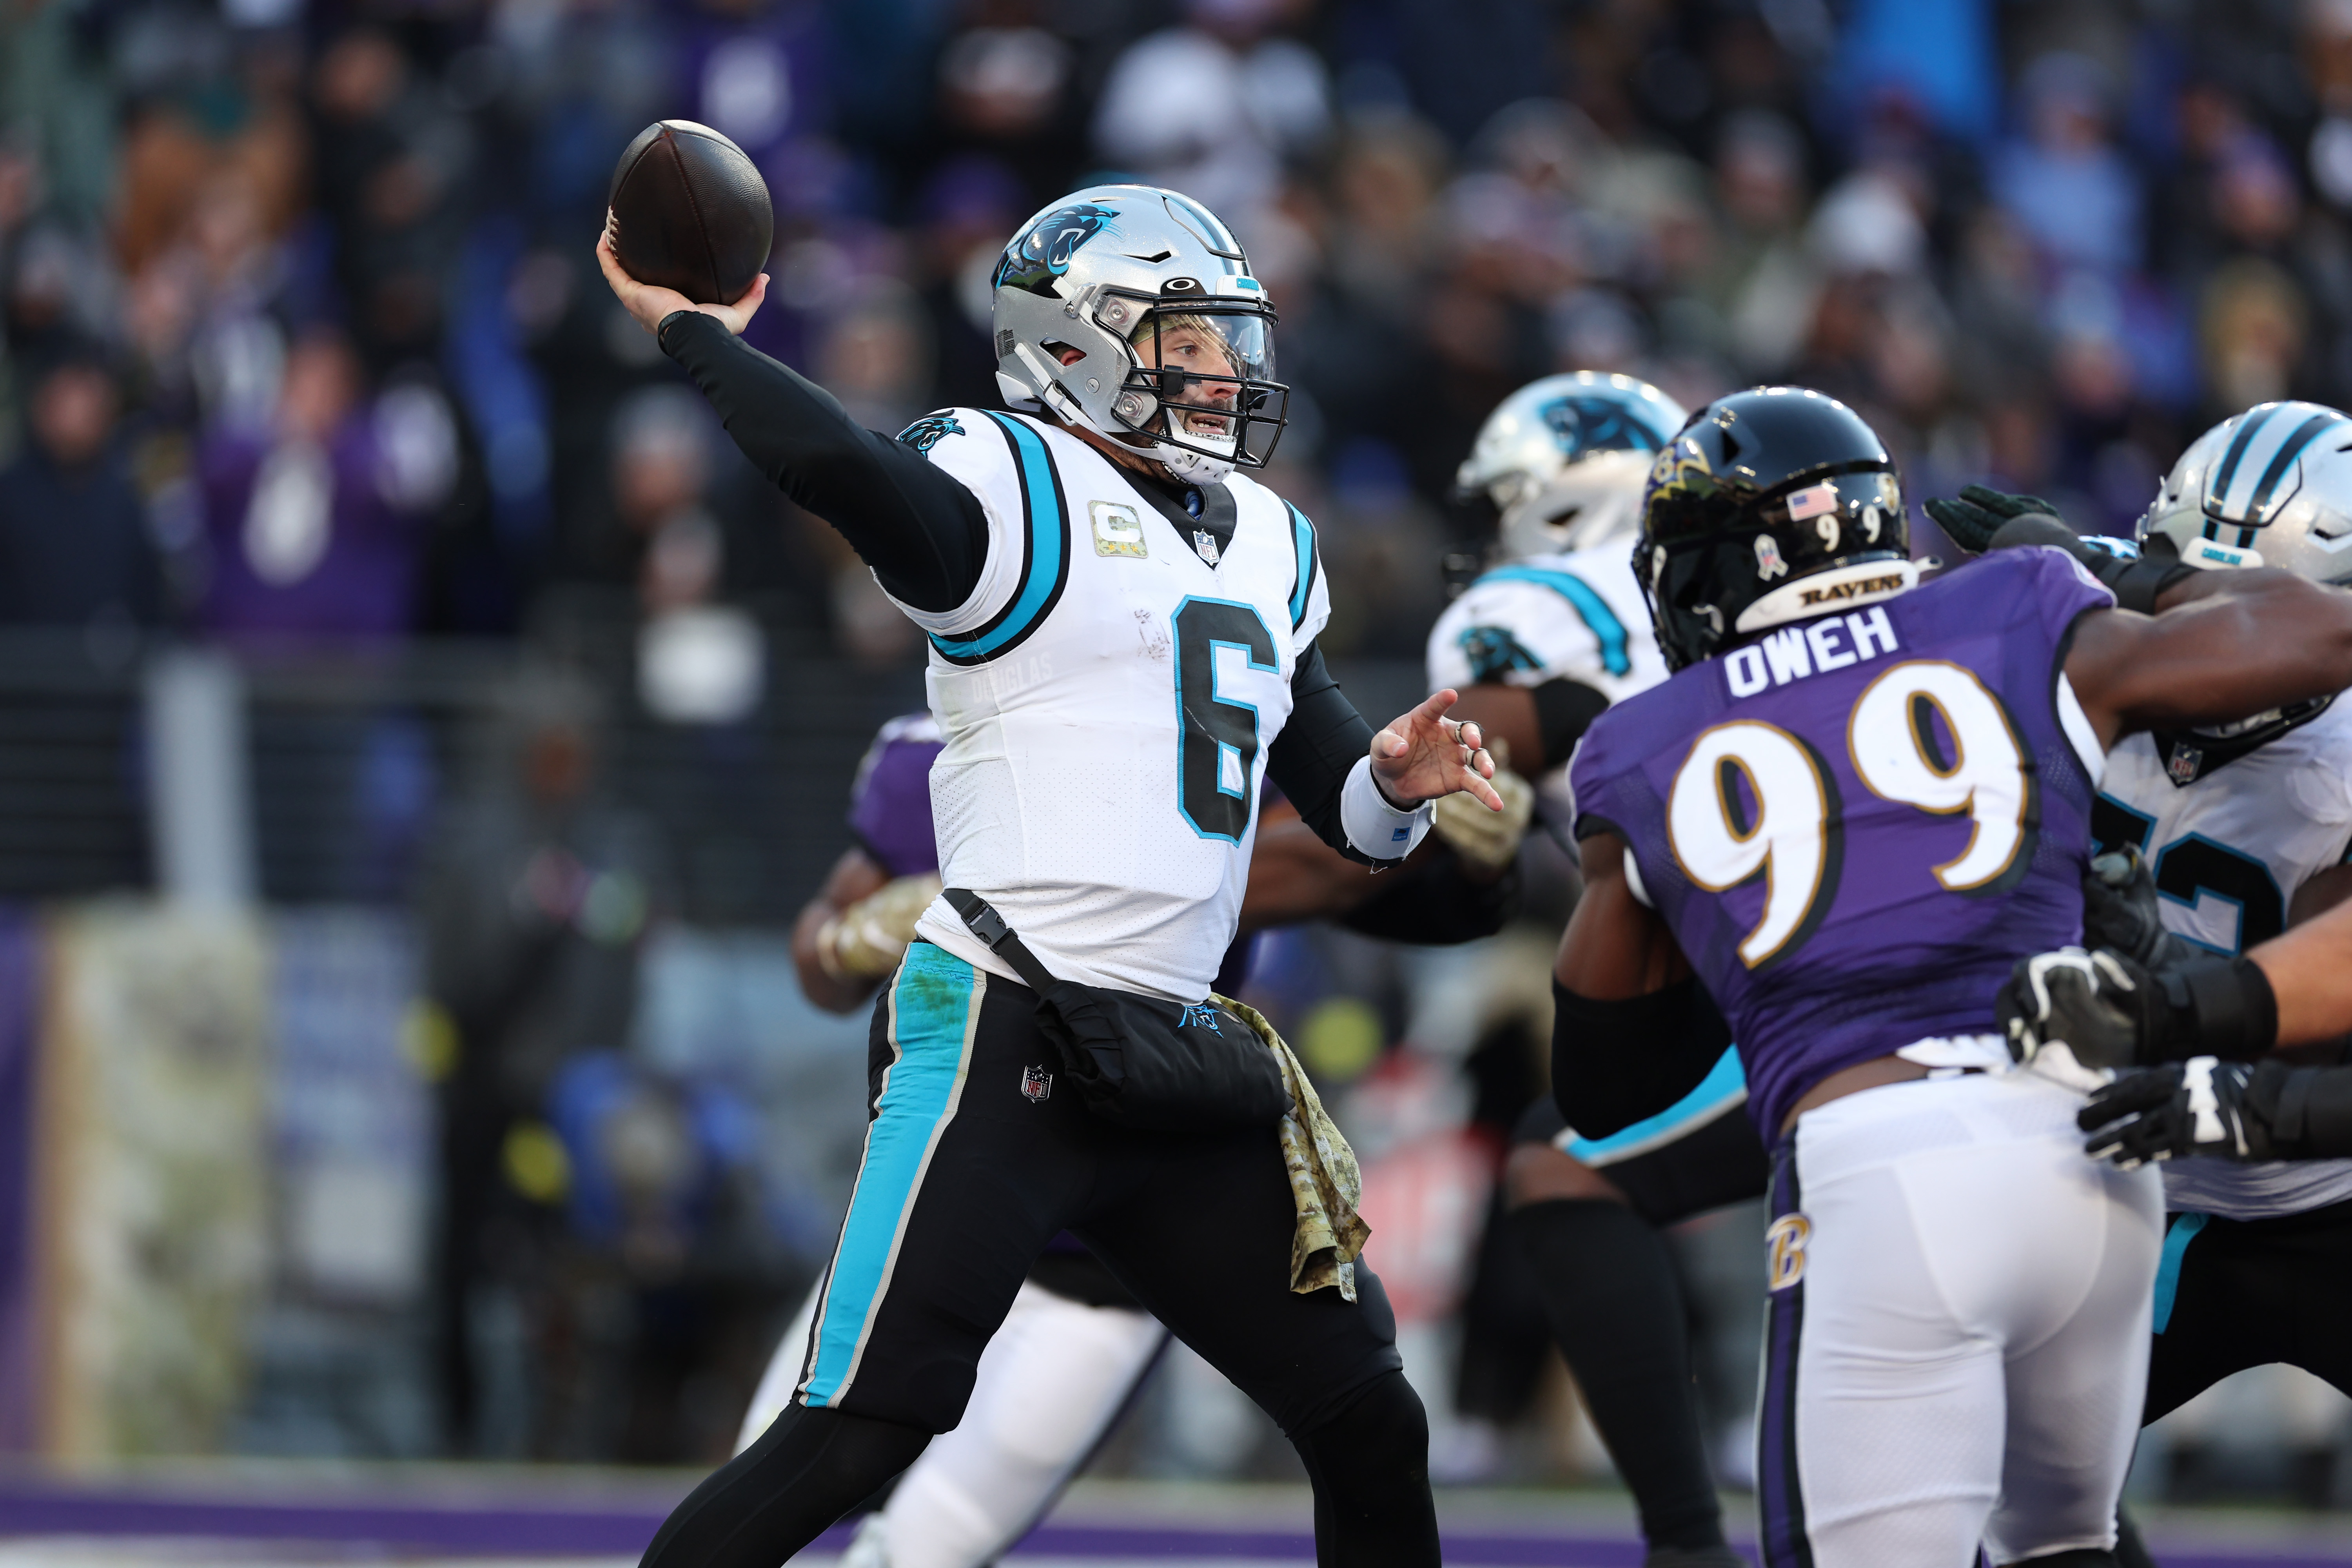 Quarterback Baker Mayfield (#6) of the Carolina Panthers passes in the game against the Baltimore Ravens at the M&T Bank Stadium in Baltimore, Maryland, November 20, 2022. /CFP 